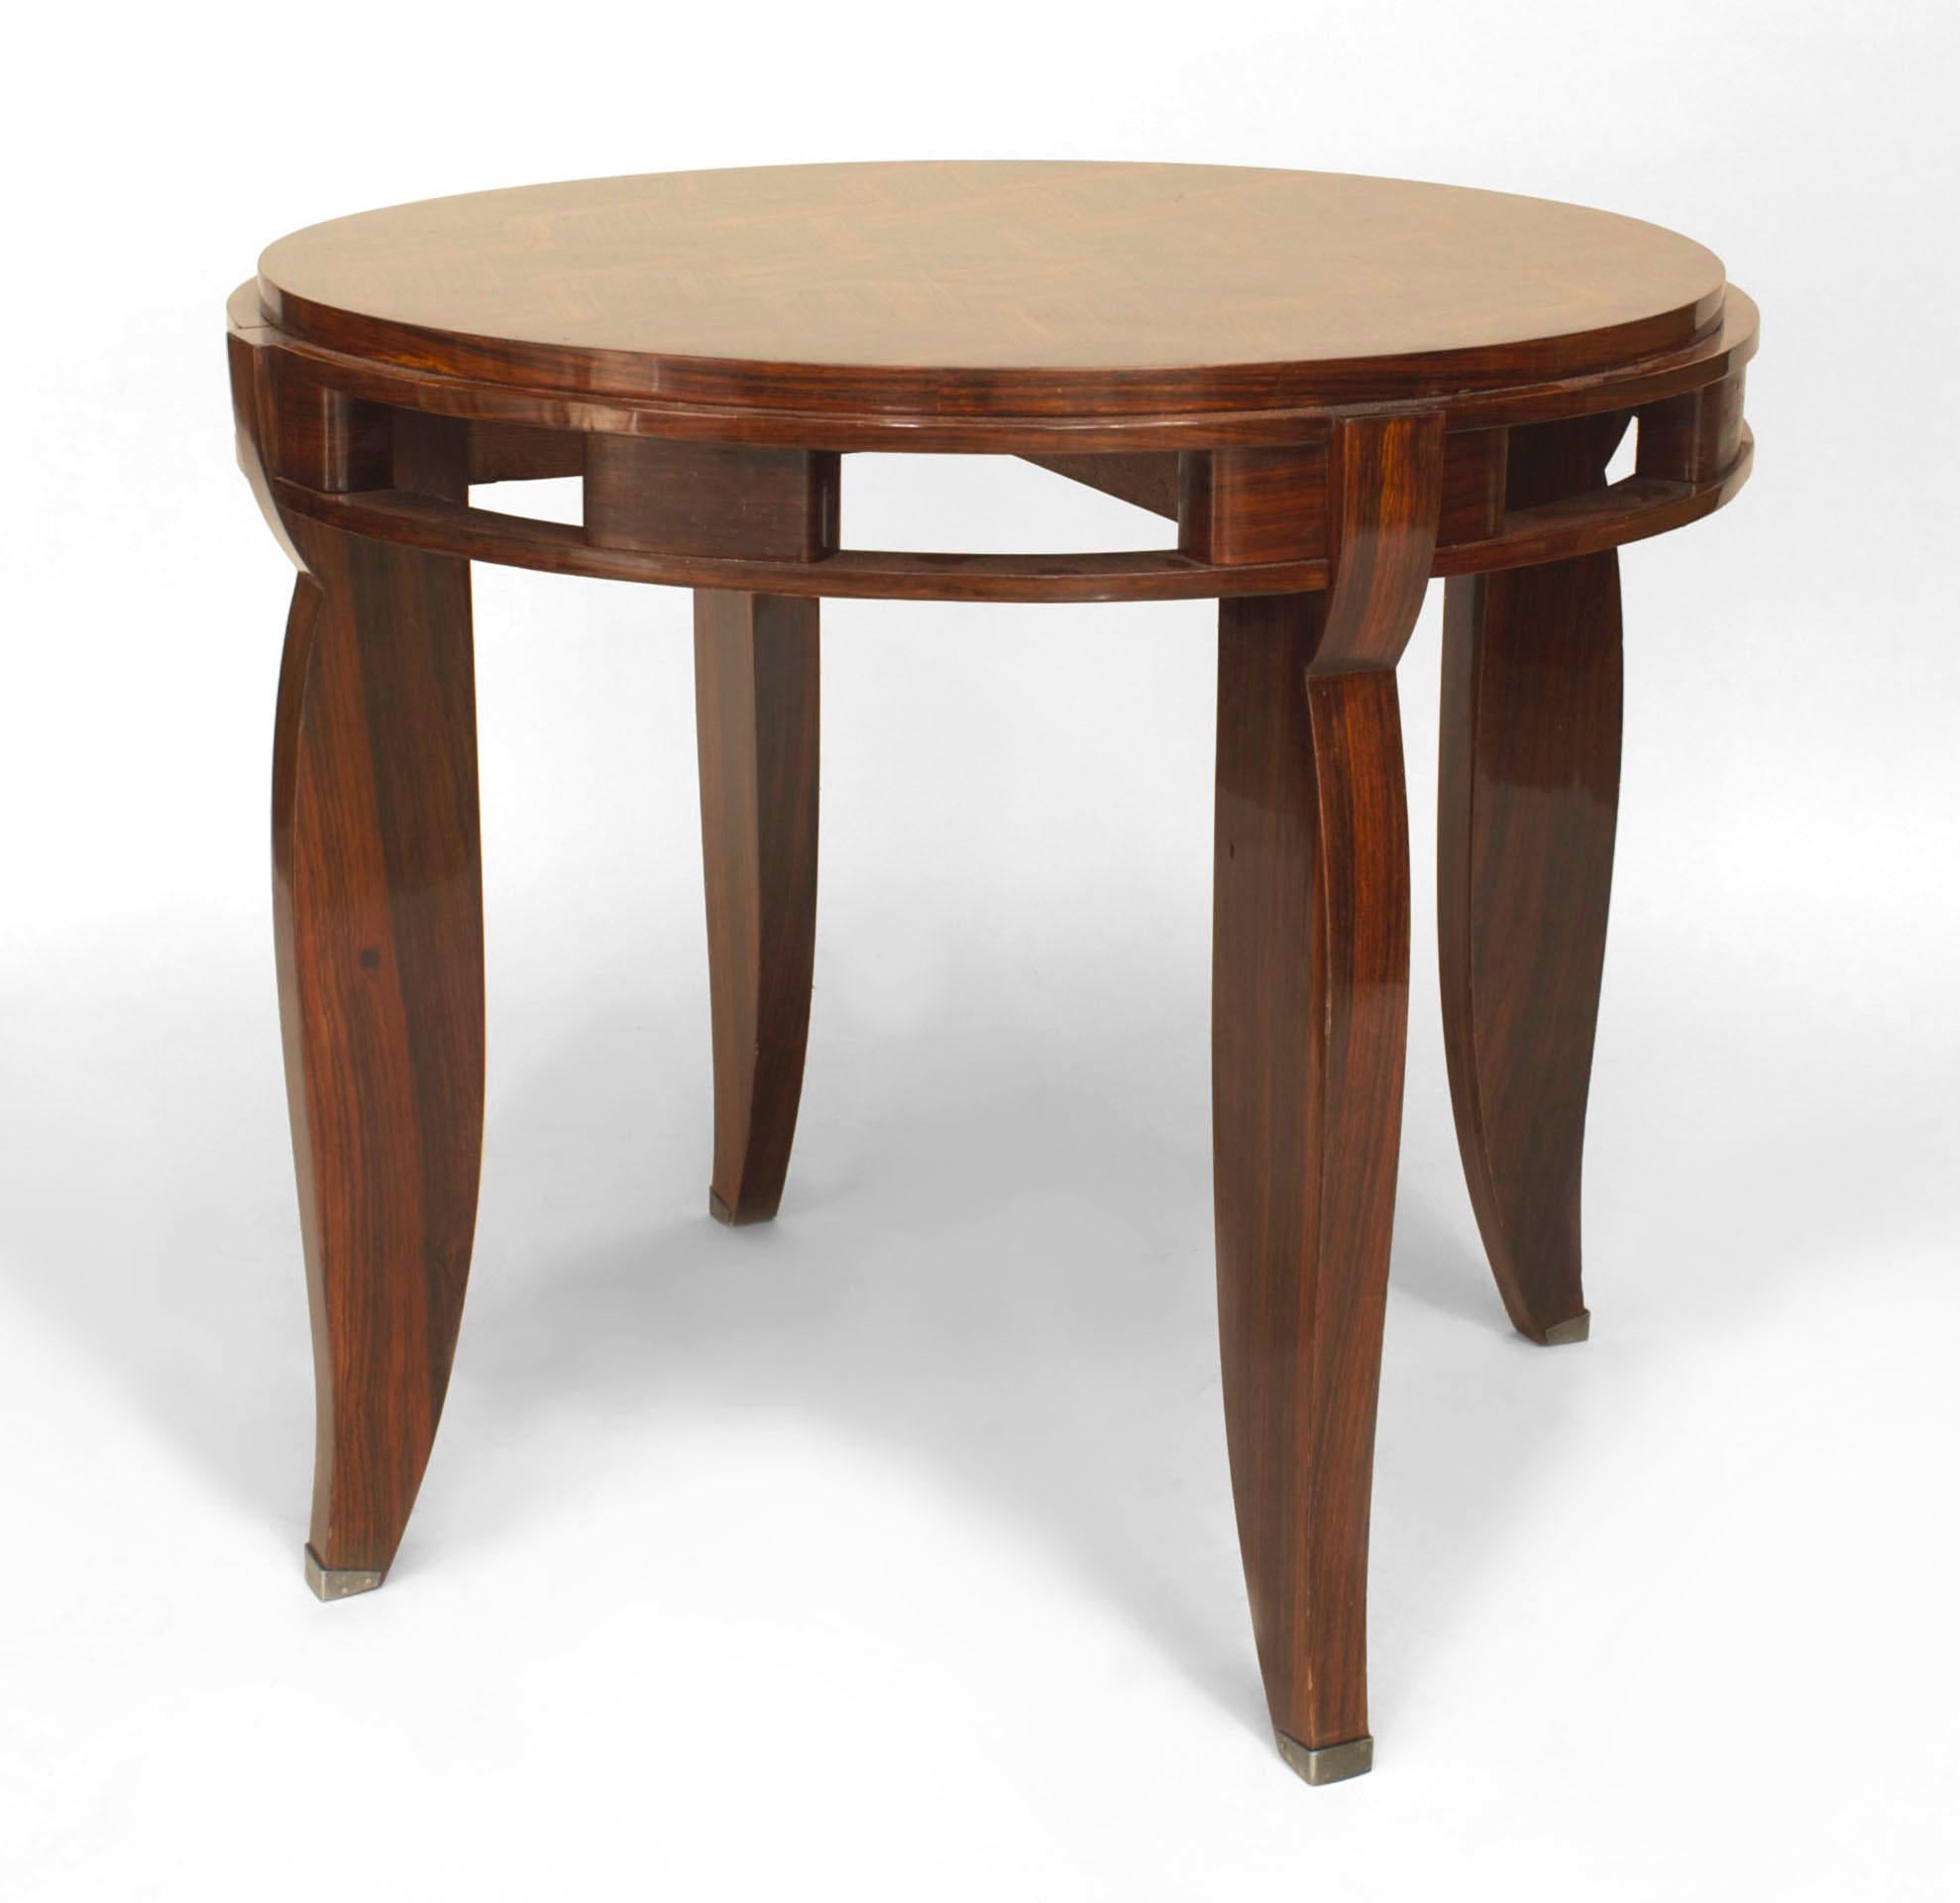 French Art Deco round rosewood end table with a geometric diamond design top & open apron with silver sabot feet. (Attributed to JULES LELEU)
